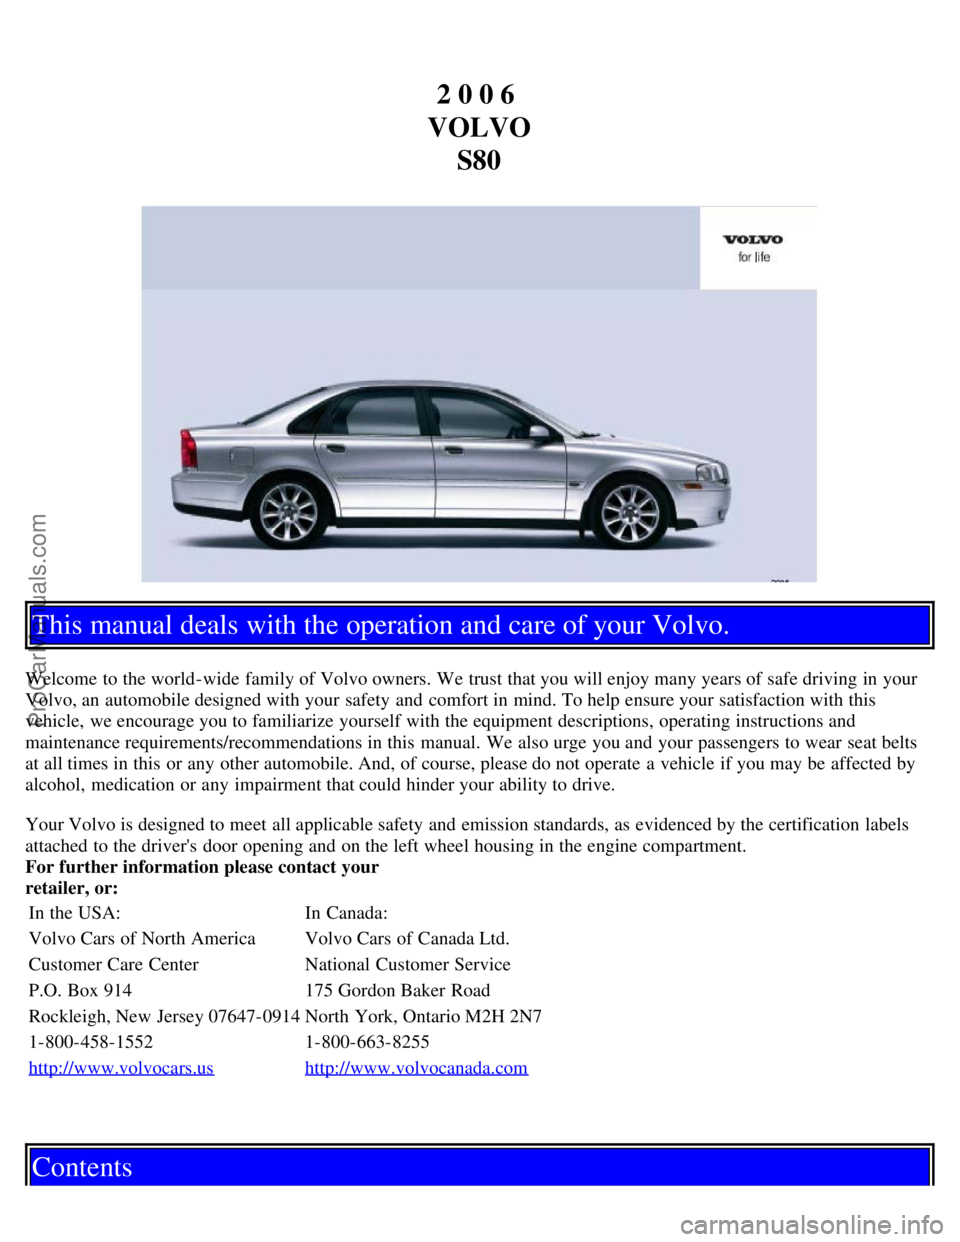 VOLVO S80 2006  Owners Manual 2 0 0 6 
VOLVO S80
This manual deals with the operation and care of your Volvo.
Welcome to the world-wide  family of Volvo owners. We trust that you will enjoy many years of safe driving in your
Volvo